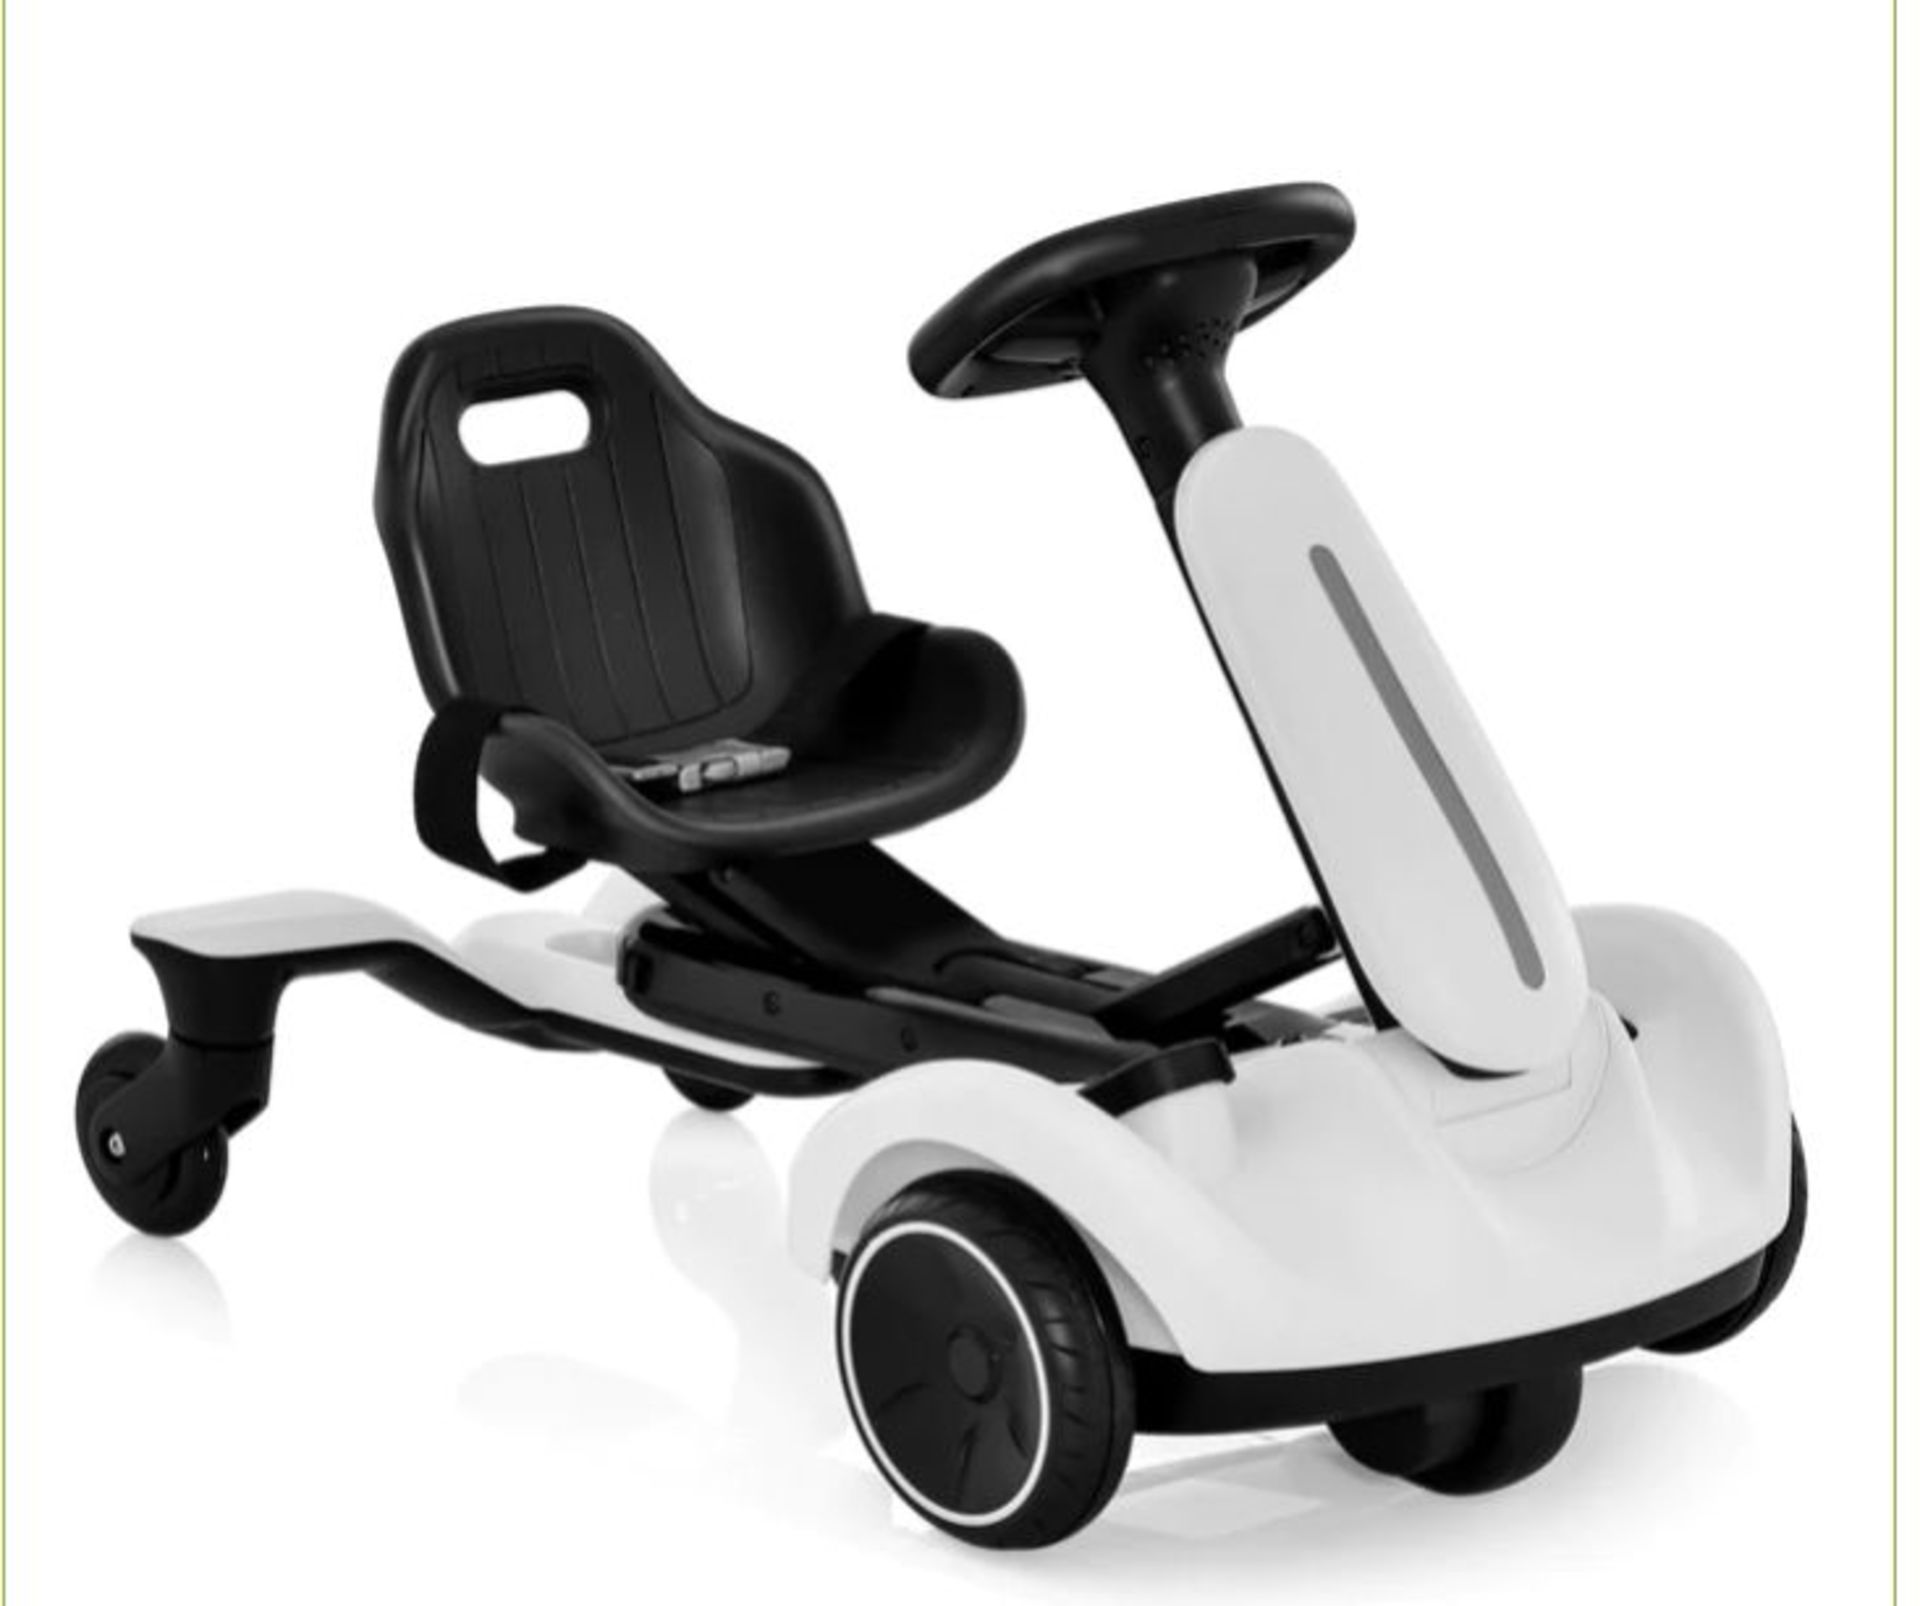 6V ELECTRIC RIDE ON DRIFT CAR FOR KIDS AGED 3-8 YEARS OLD-WHITE. - ER54. Are you looking for the